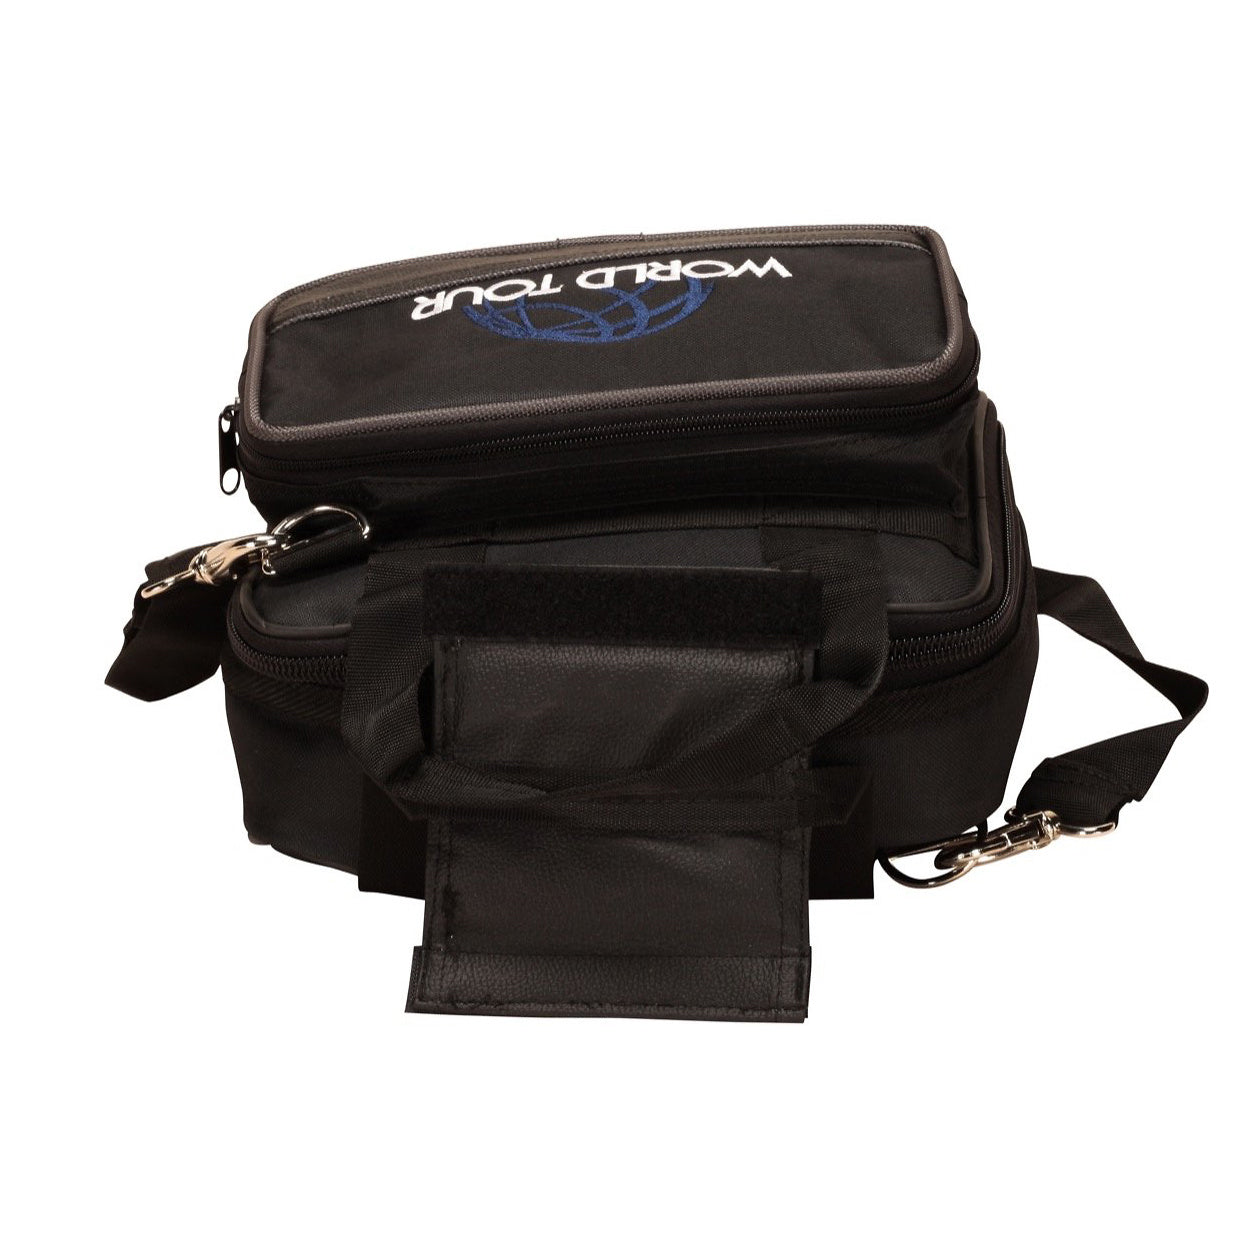 World Tour Gig Bag, 10 x 9.5 x 3.5 in.